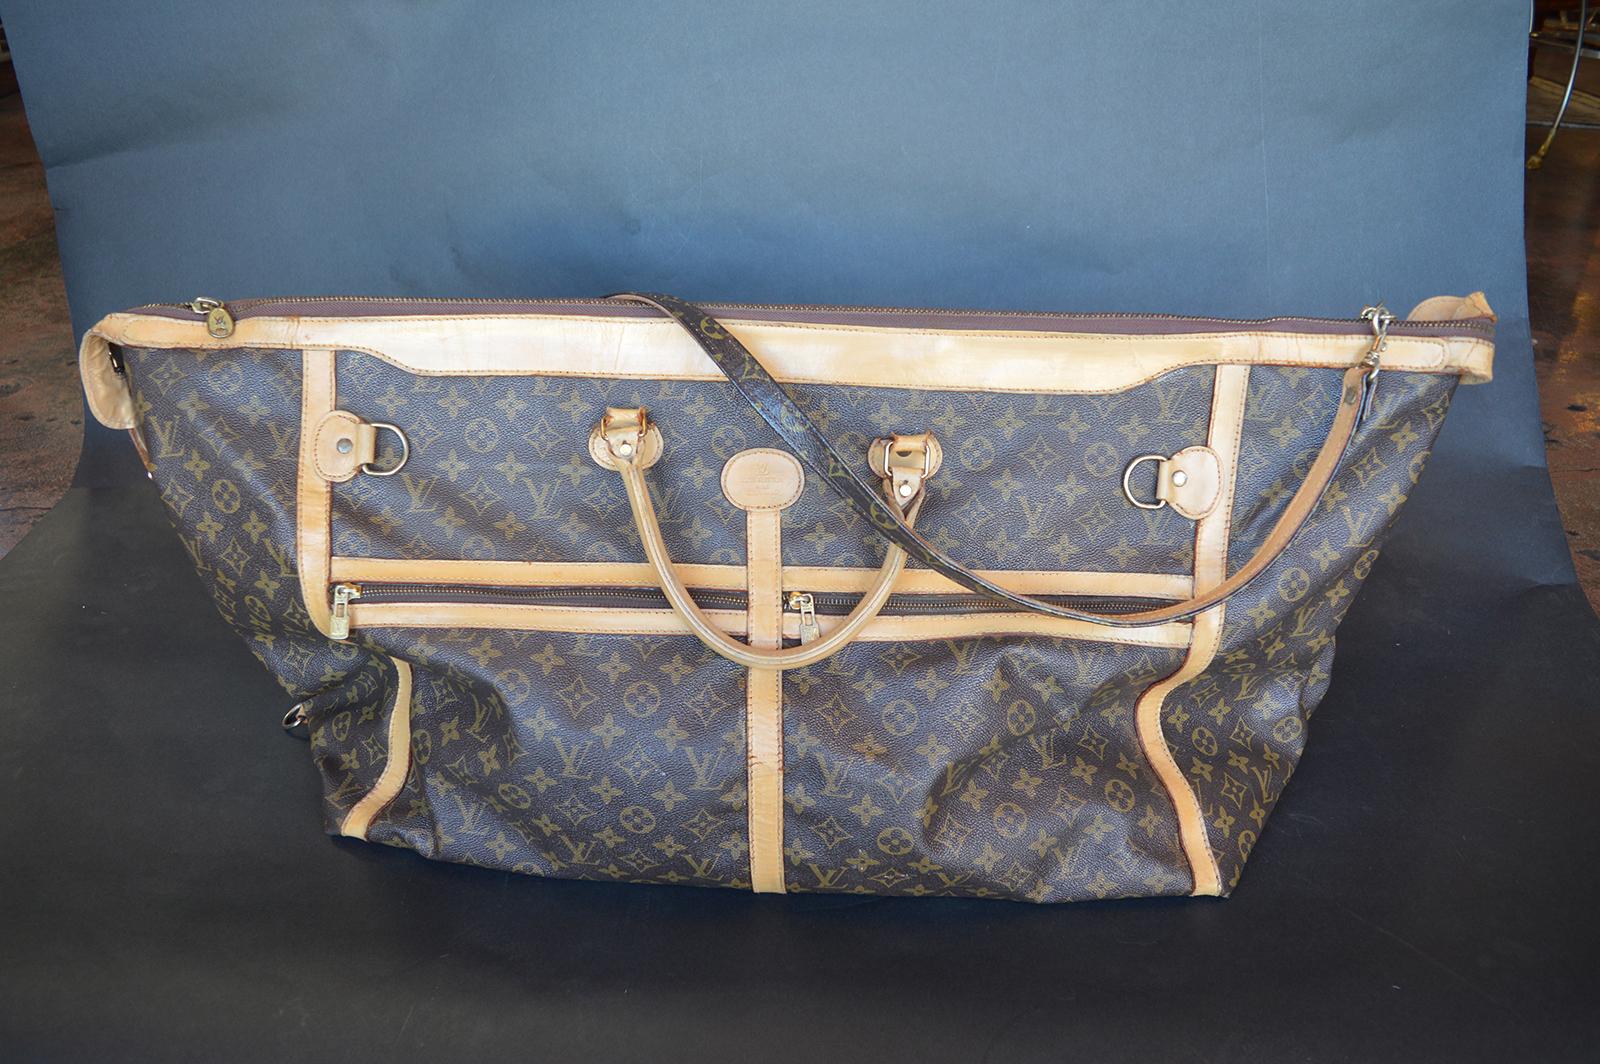 Set of two soft Luis Vuitton luggage.
Duffle bag measures 37 inches W x 18 inches H.